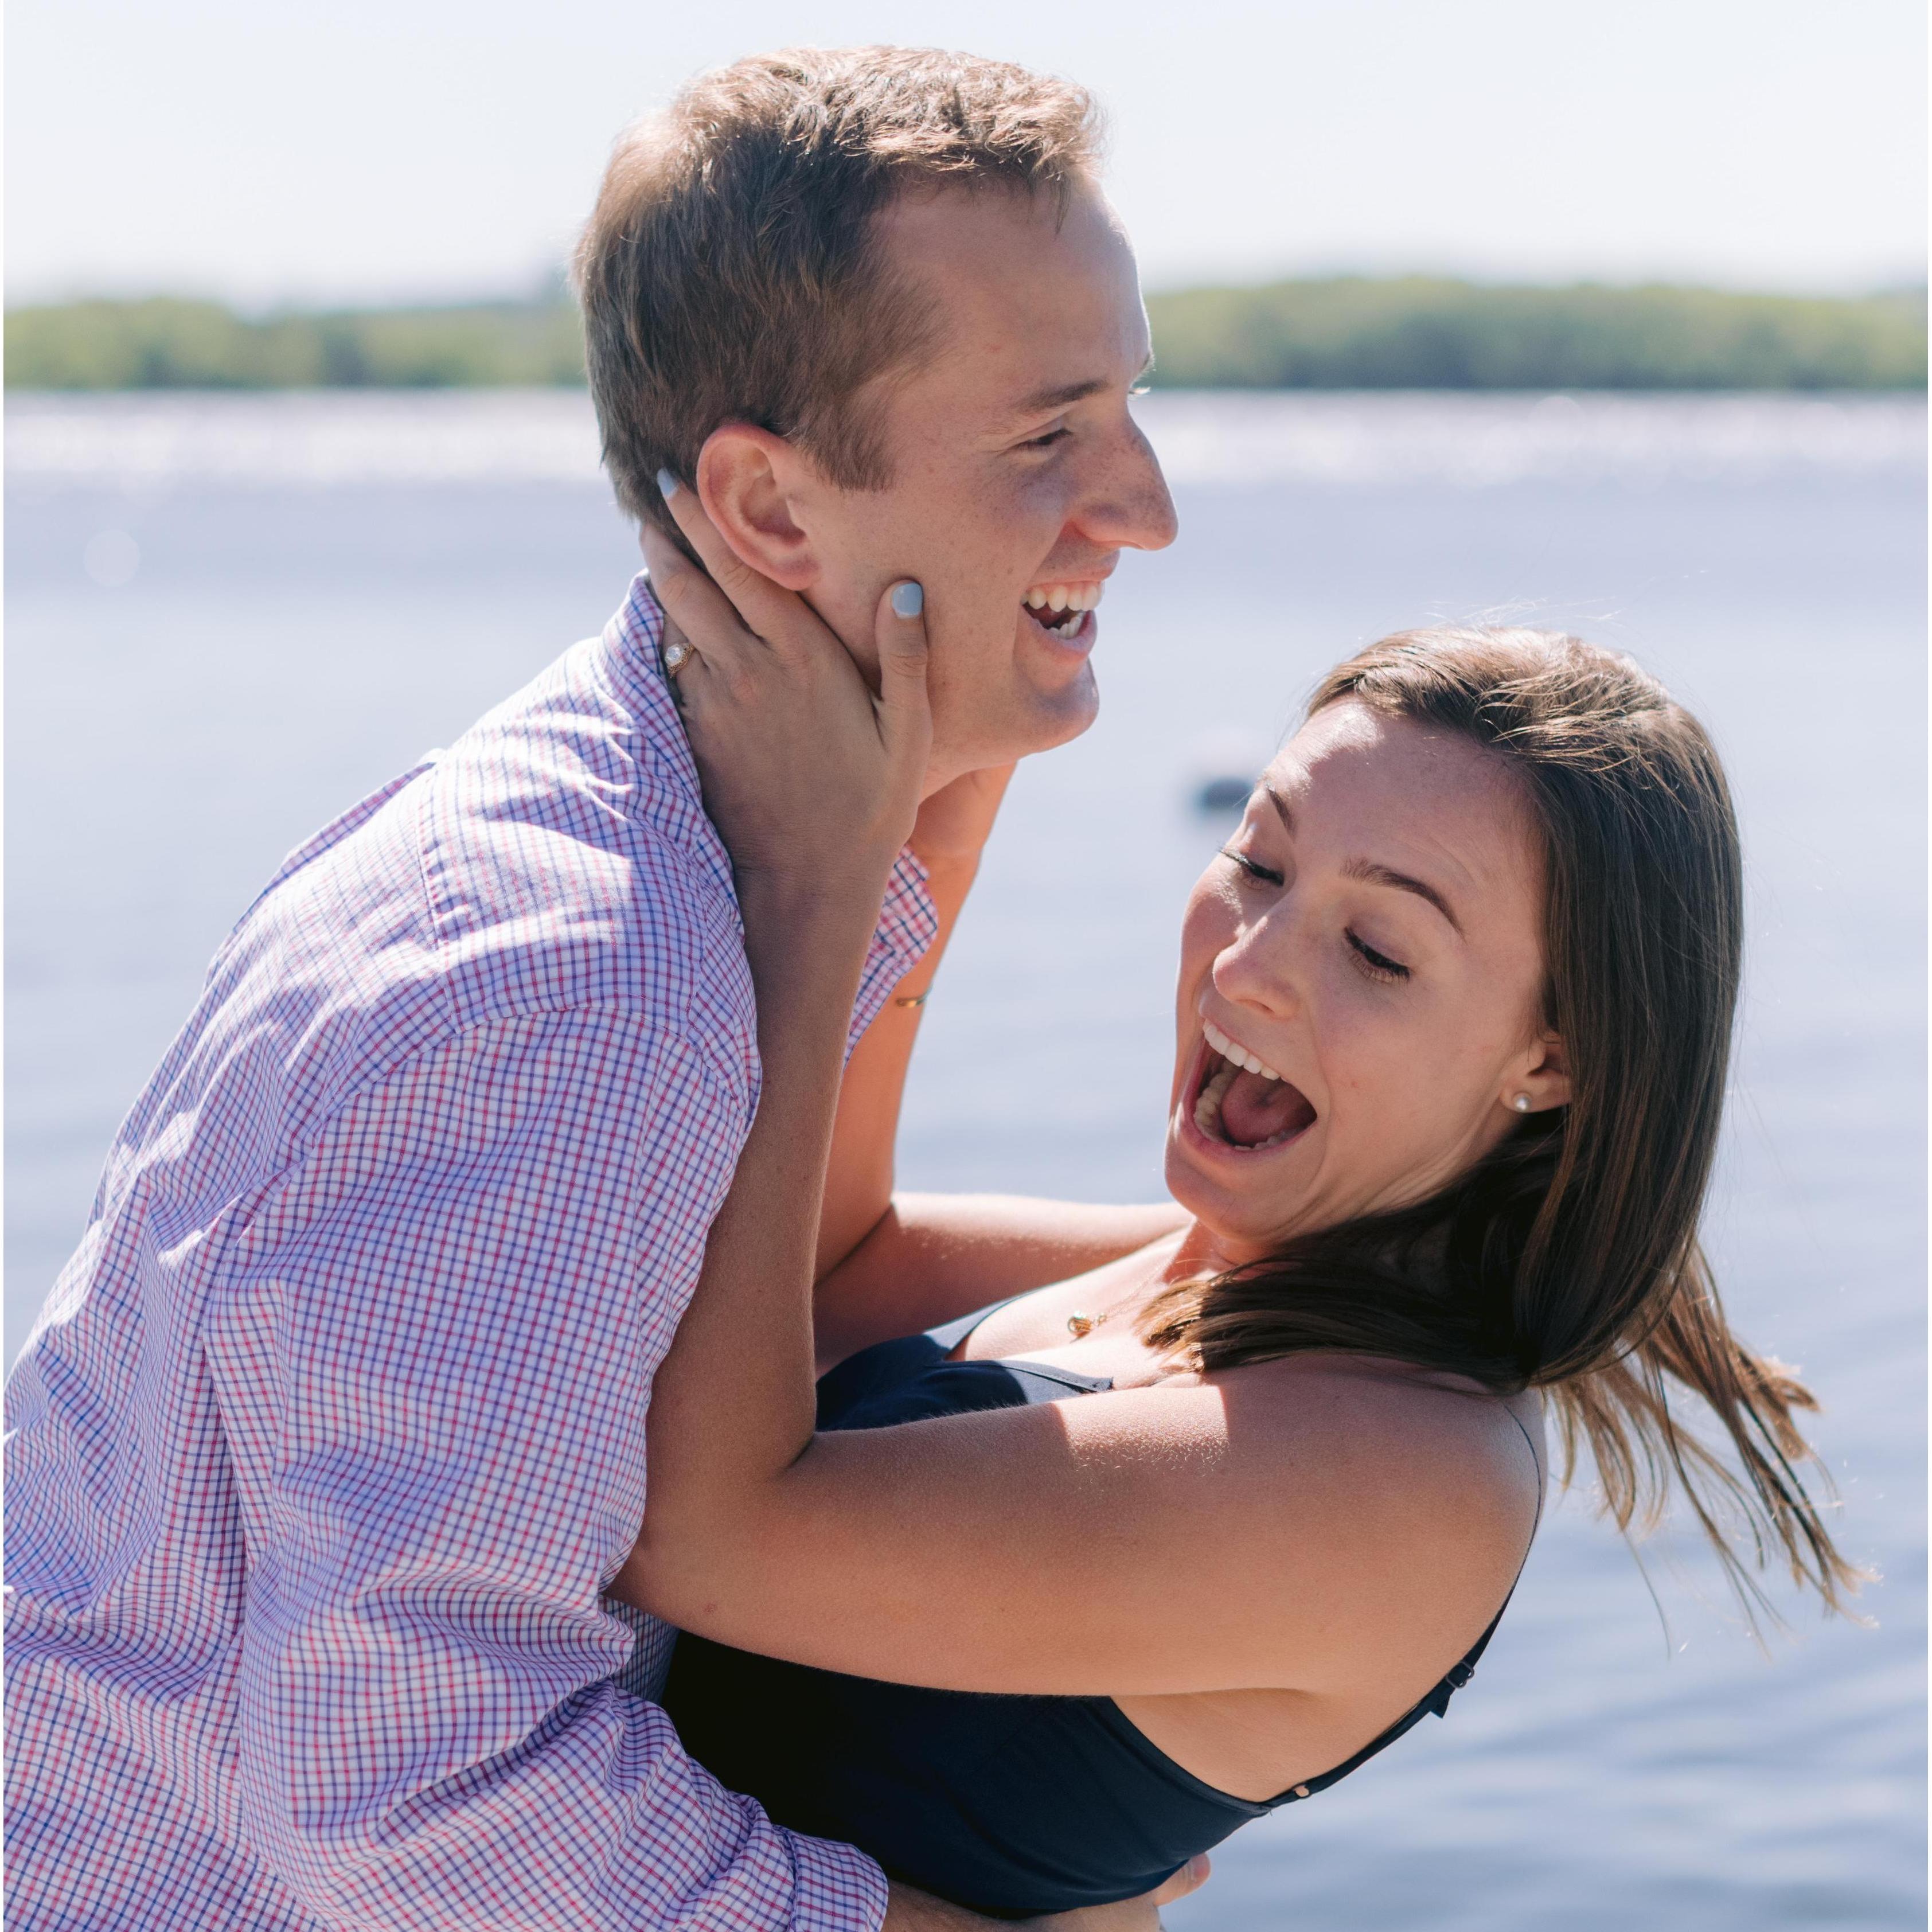 Caleb threatens to throw Sydney off the dock during the engagement photo shoot :)